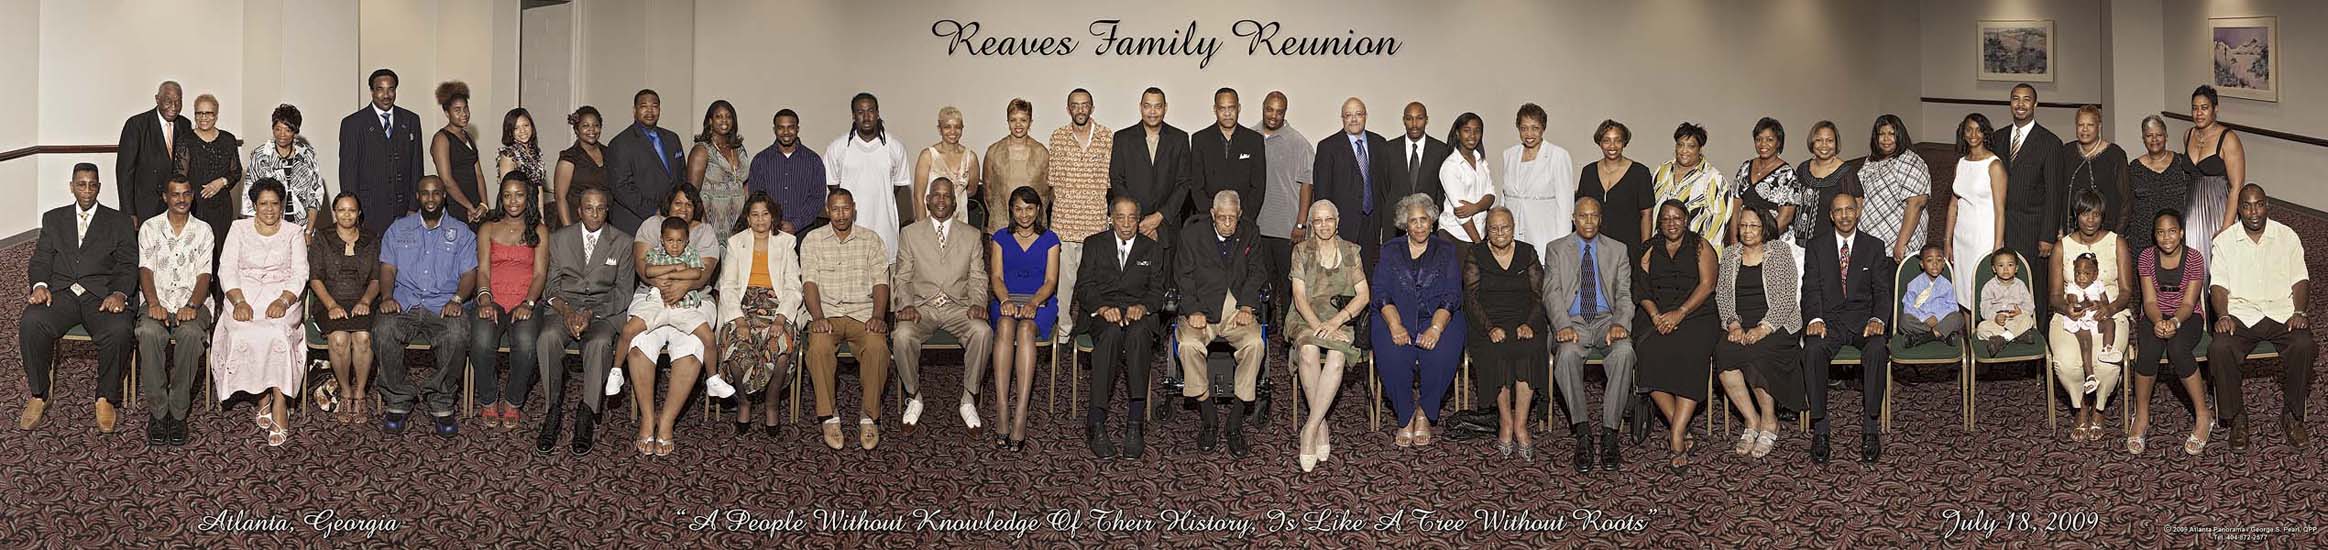 Reaves_Family_Reunion_Photograph